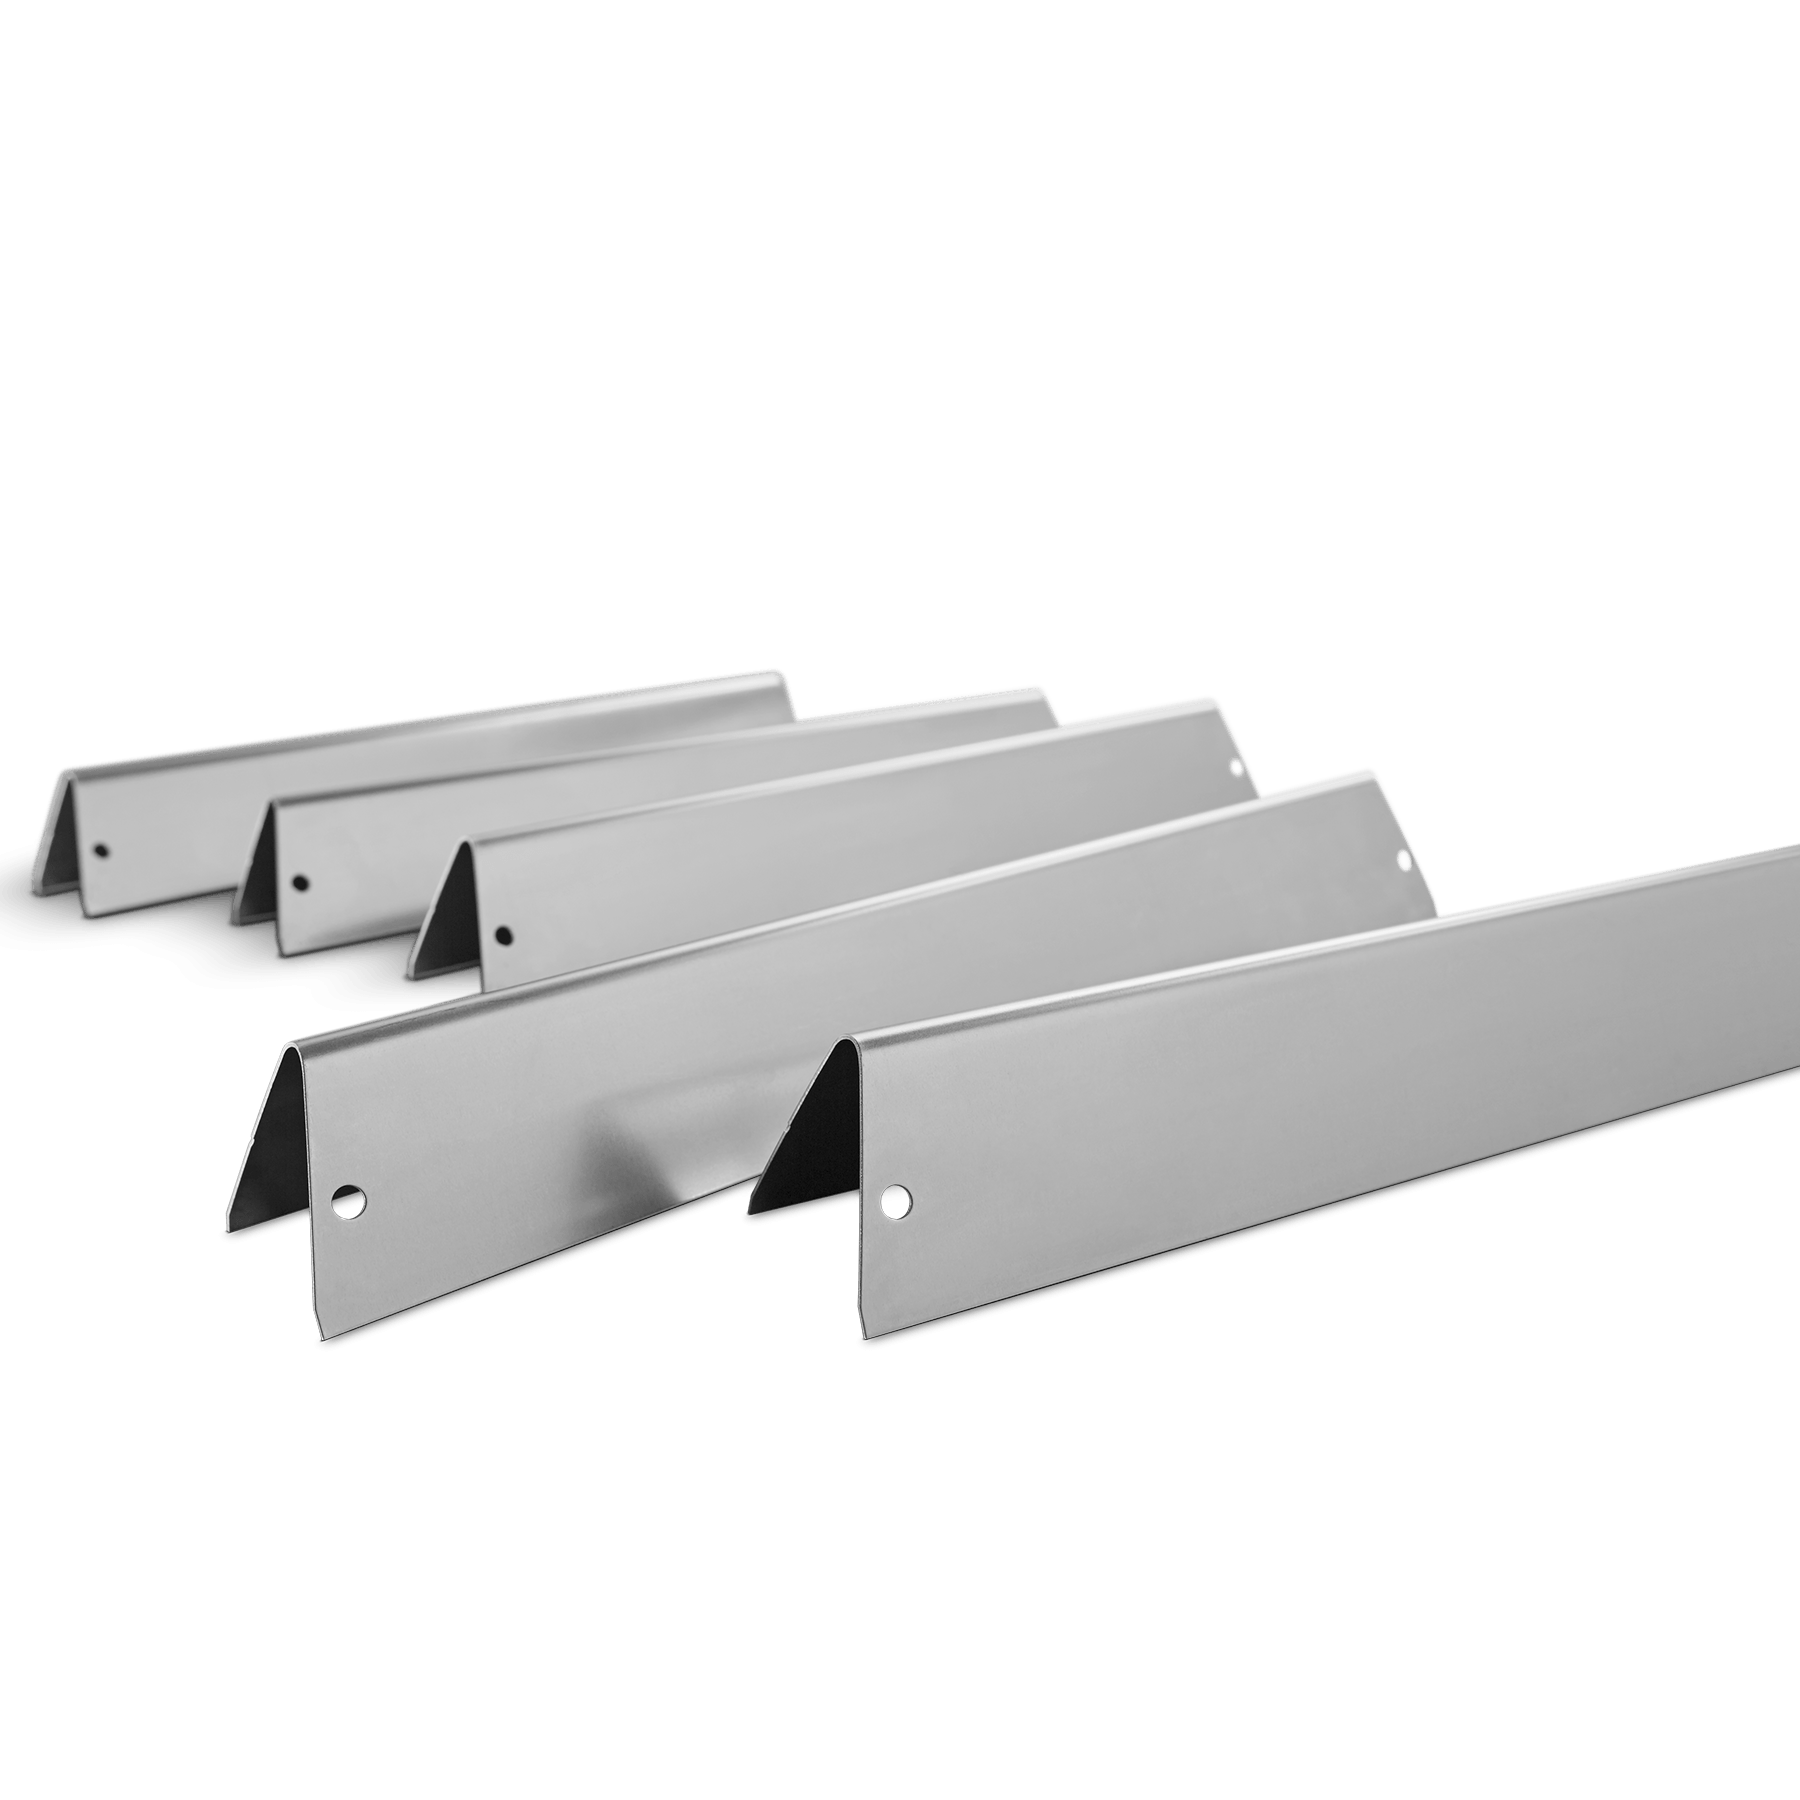 Weber  Stainless Steel Flavorizer Bars #9938/#7540 and e/s 300 series grates 